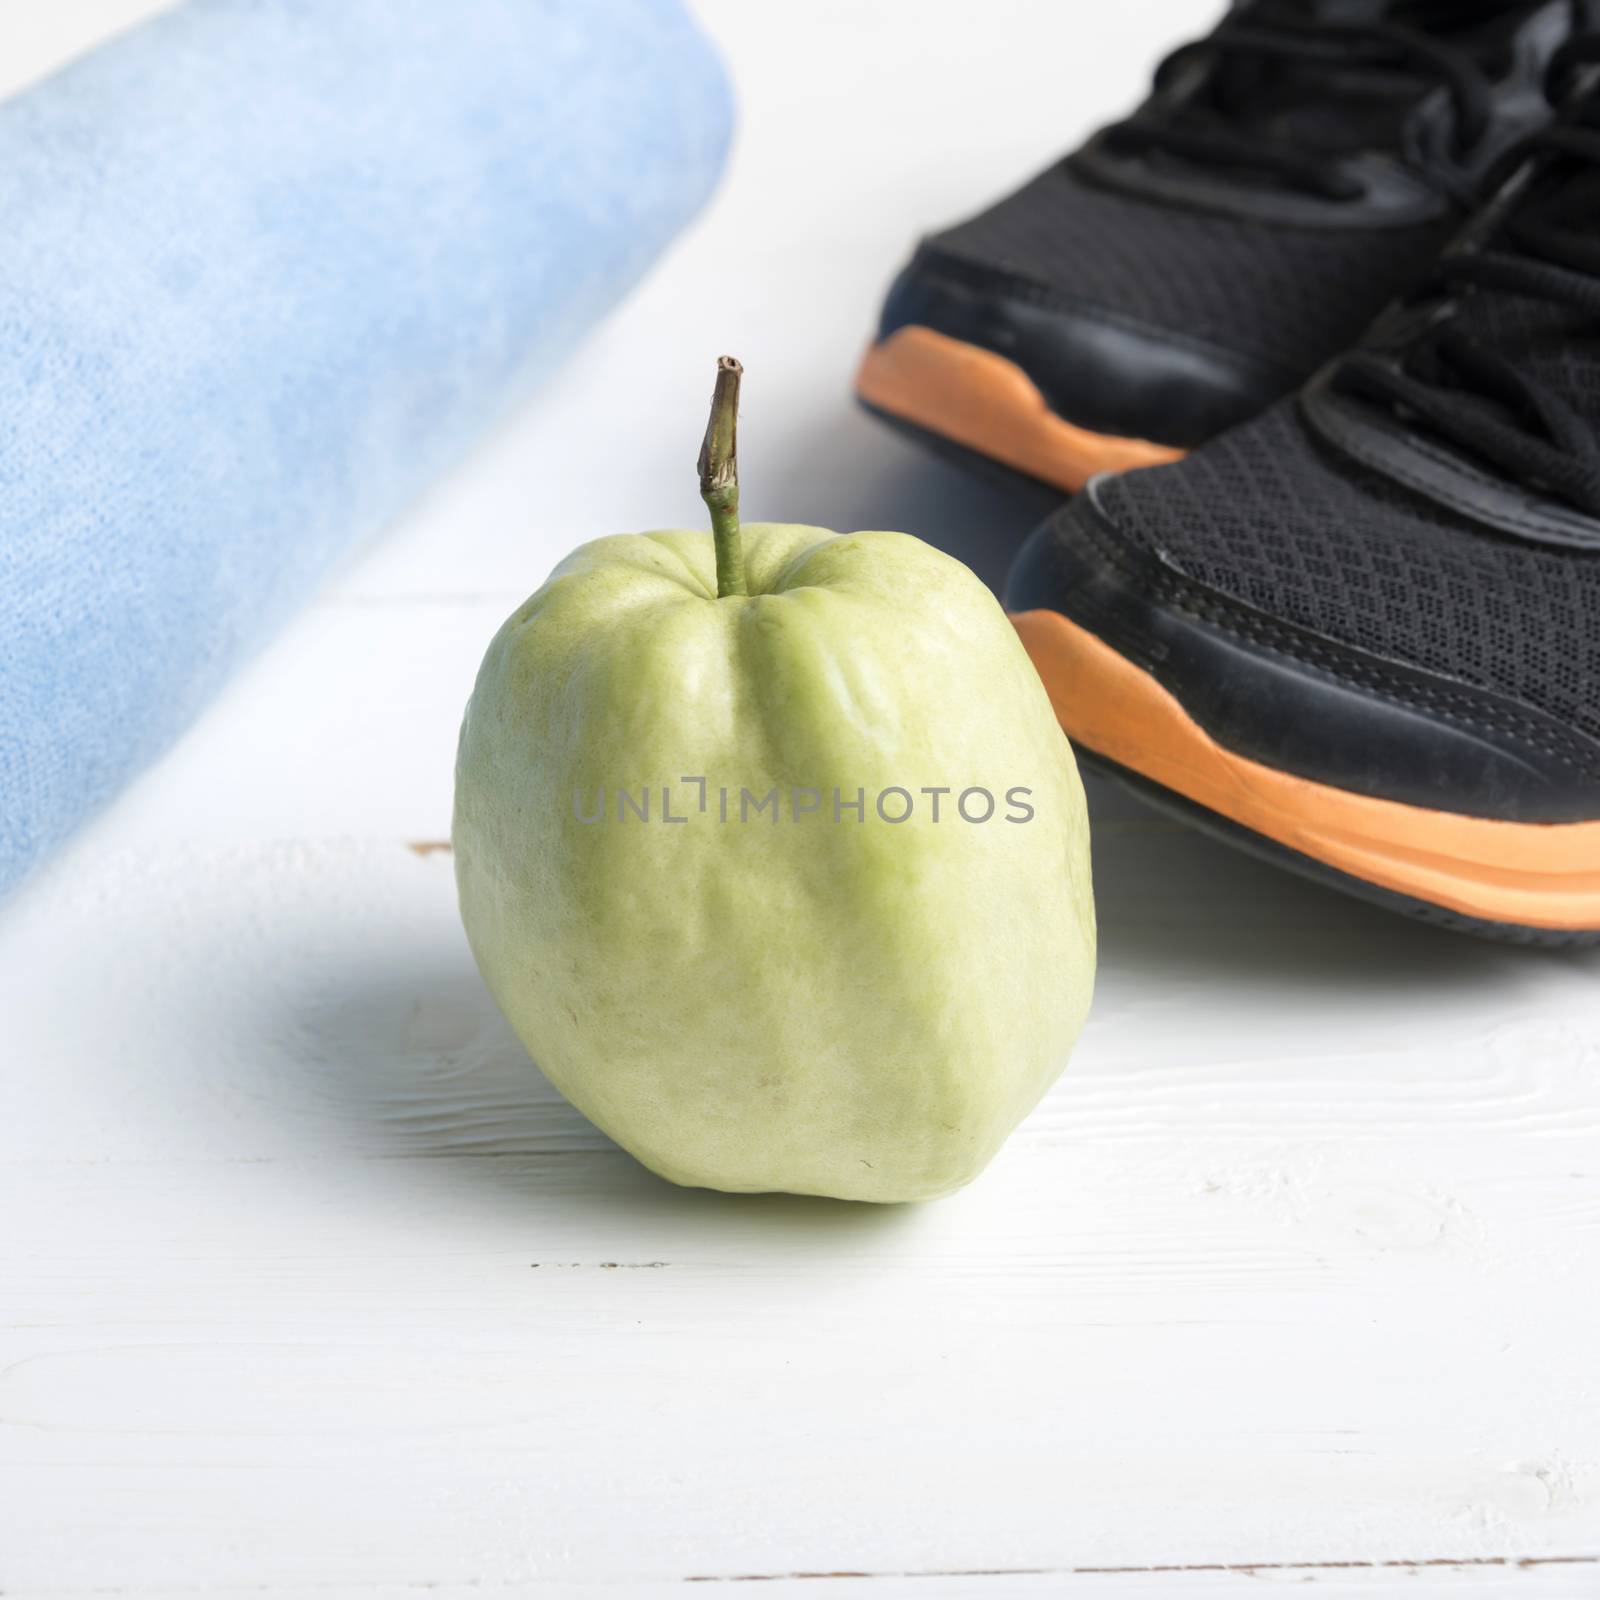 fitness equipment : running shoes,blue towel and guava fruit on white wood table